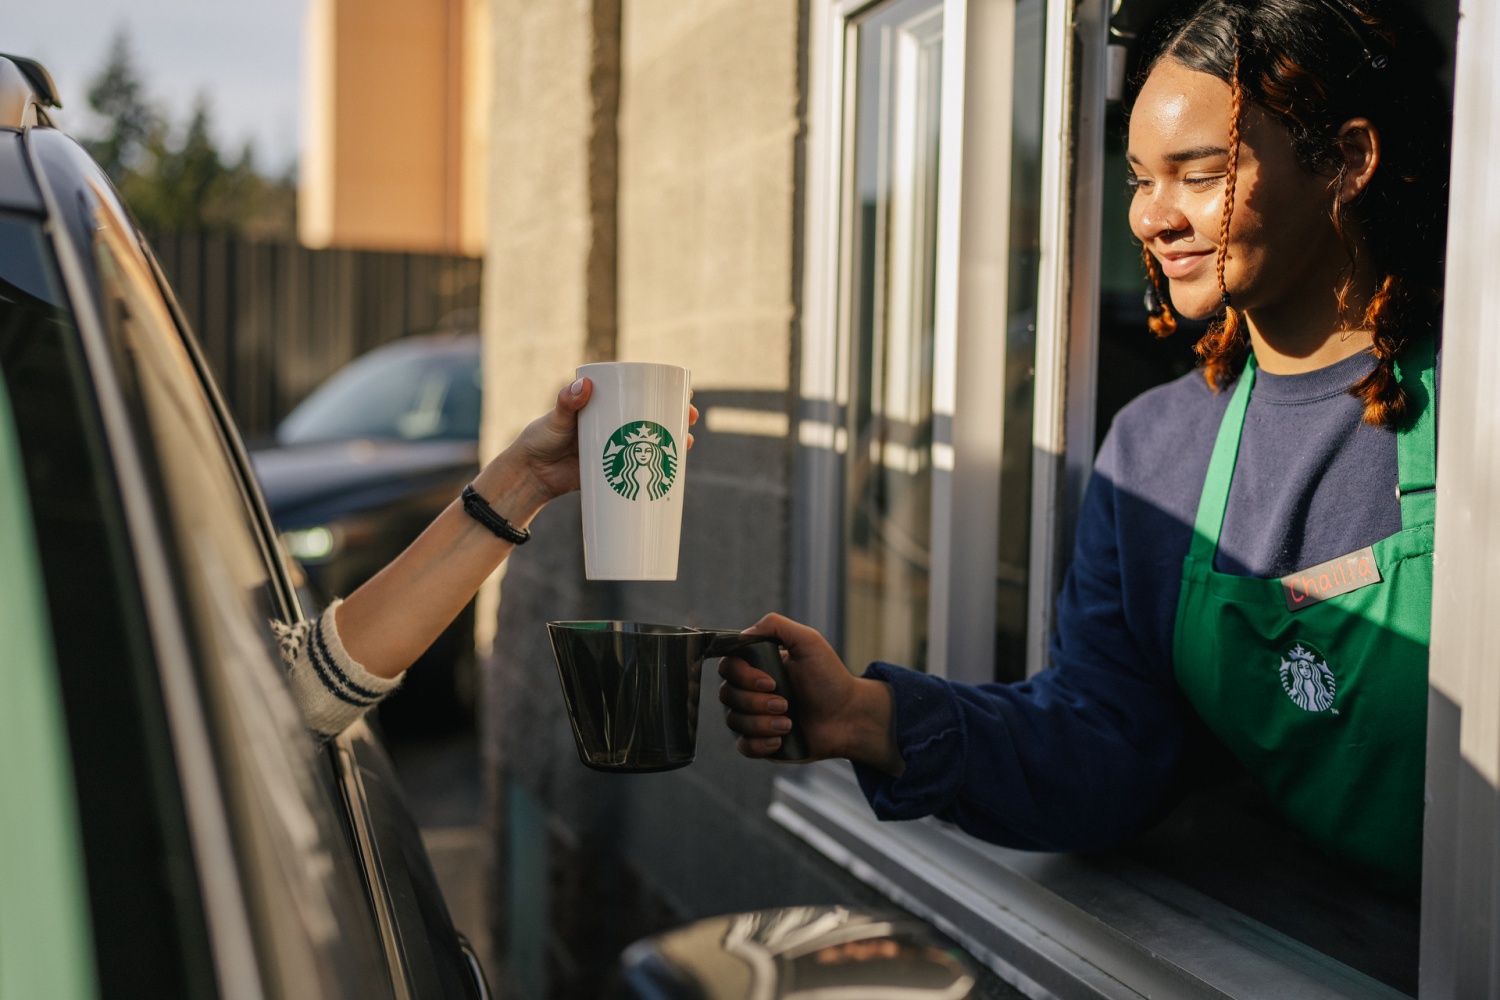 Starbucks Becomes First National Coffee Retailer to Accept Reusable Cups for Drive-thru and Mobile Orders